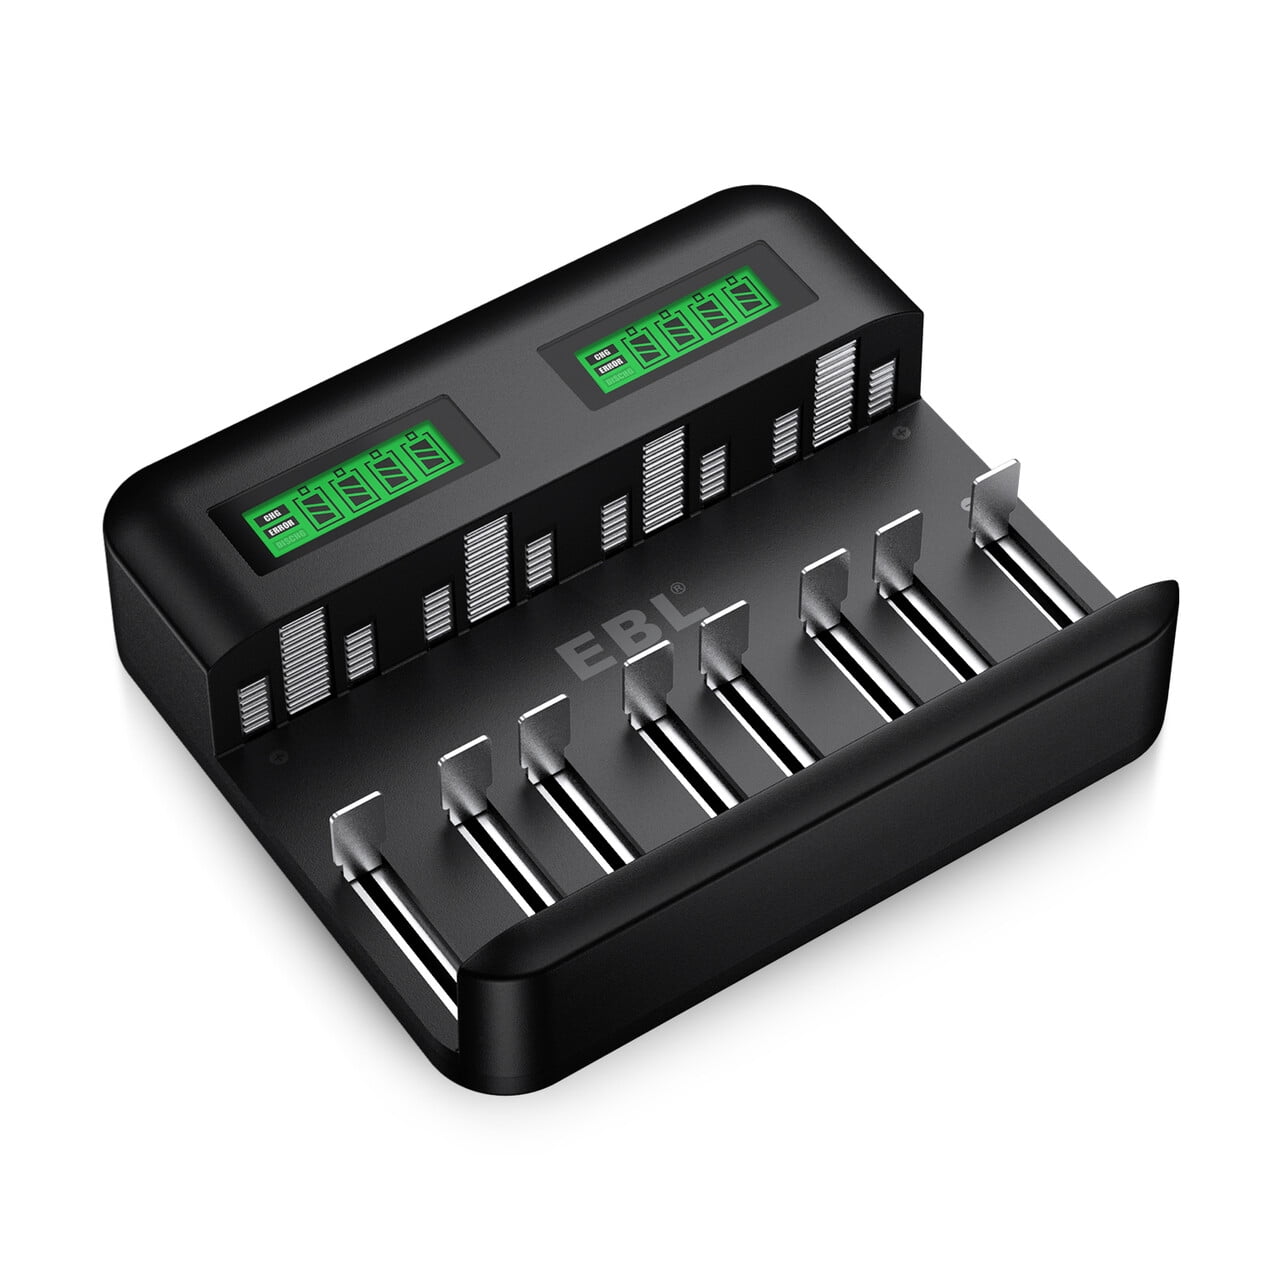 USB Charger 4 Slots Battery Charger For AA/AAA NI-MH NiCd Rechargeable Batteries 